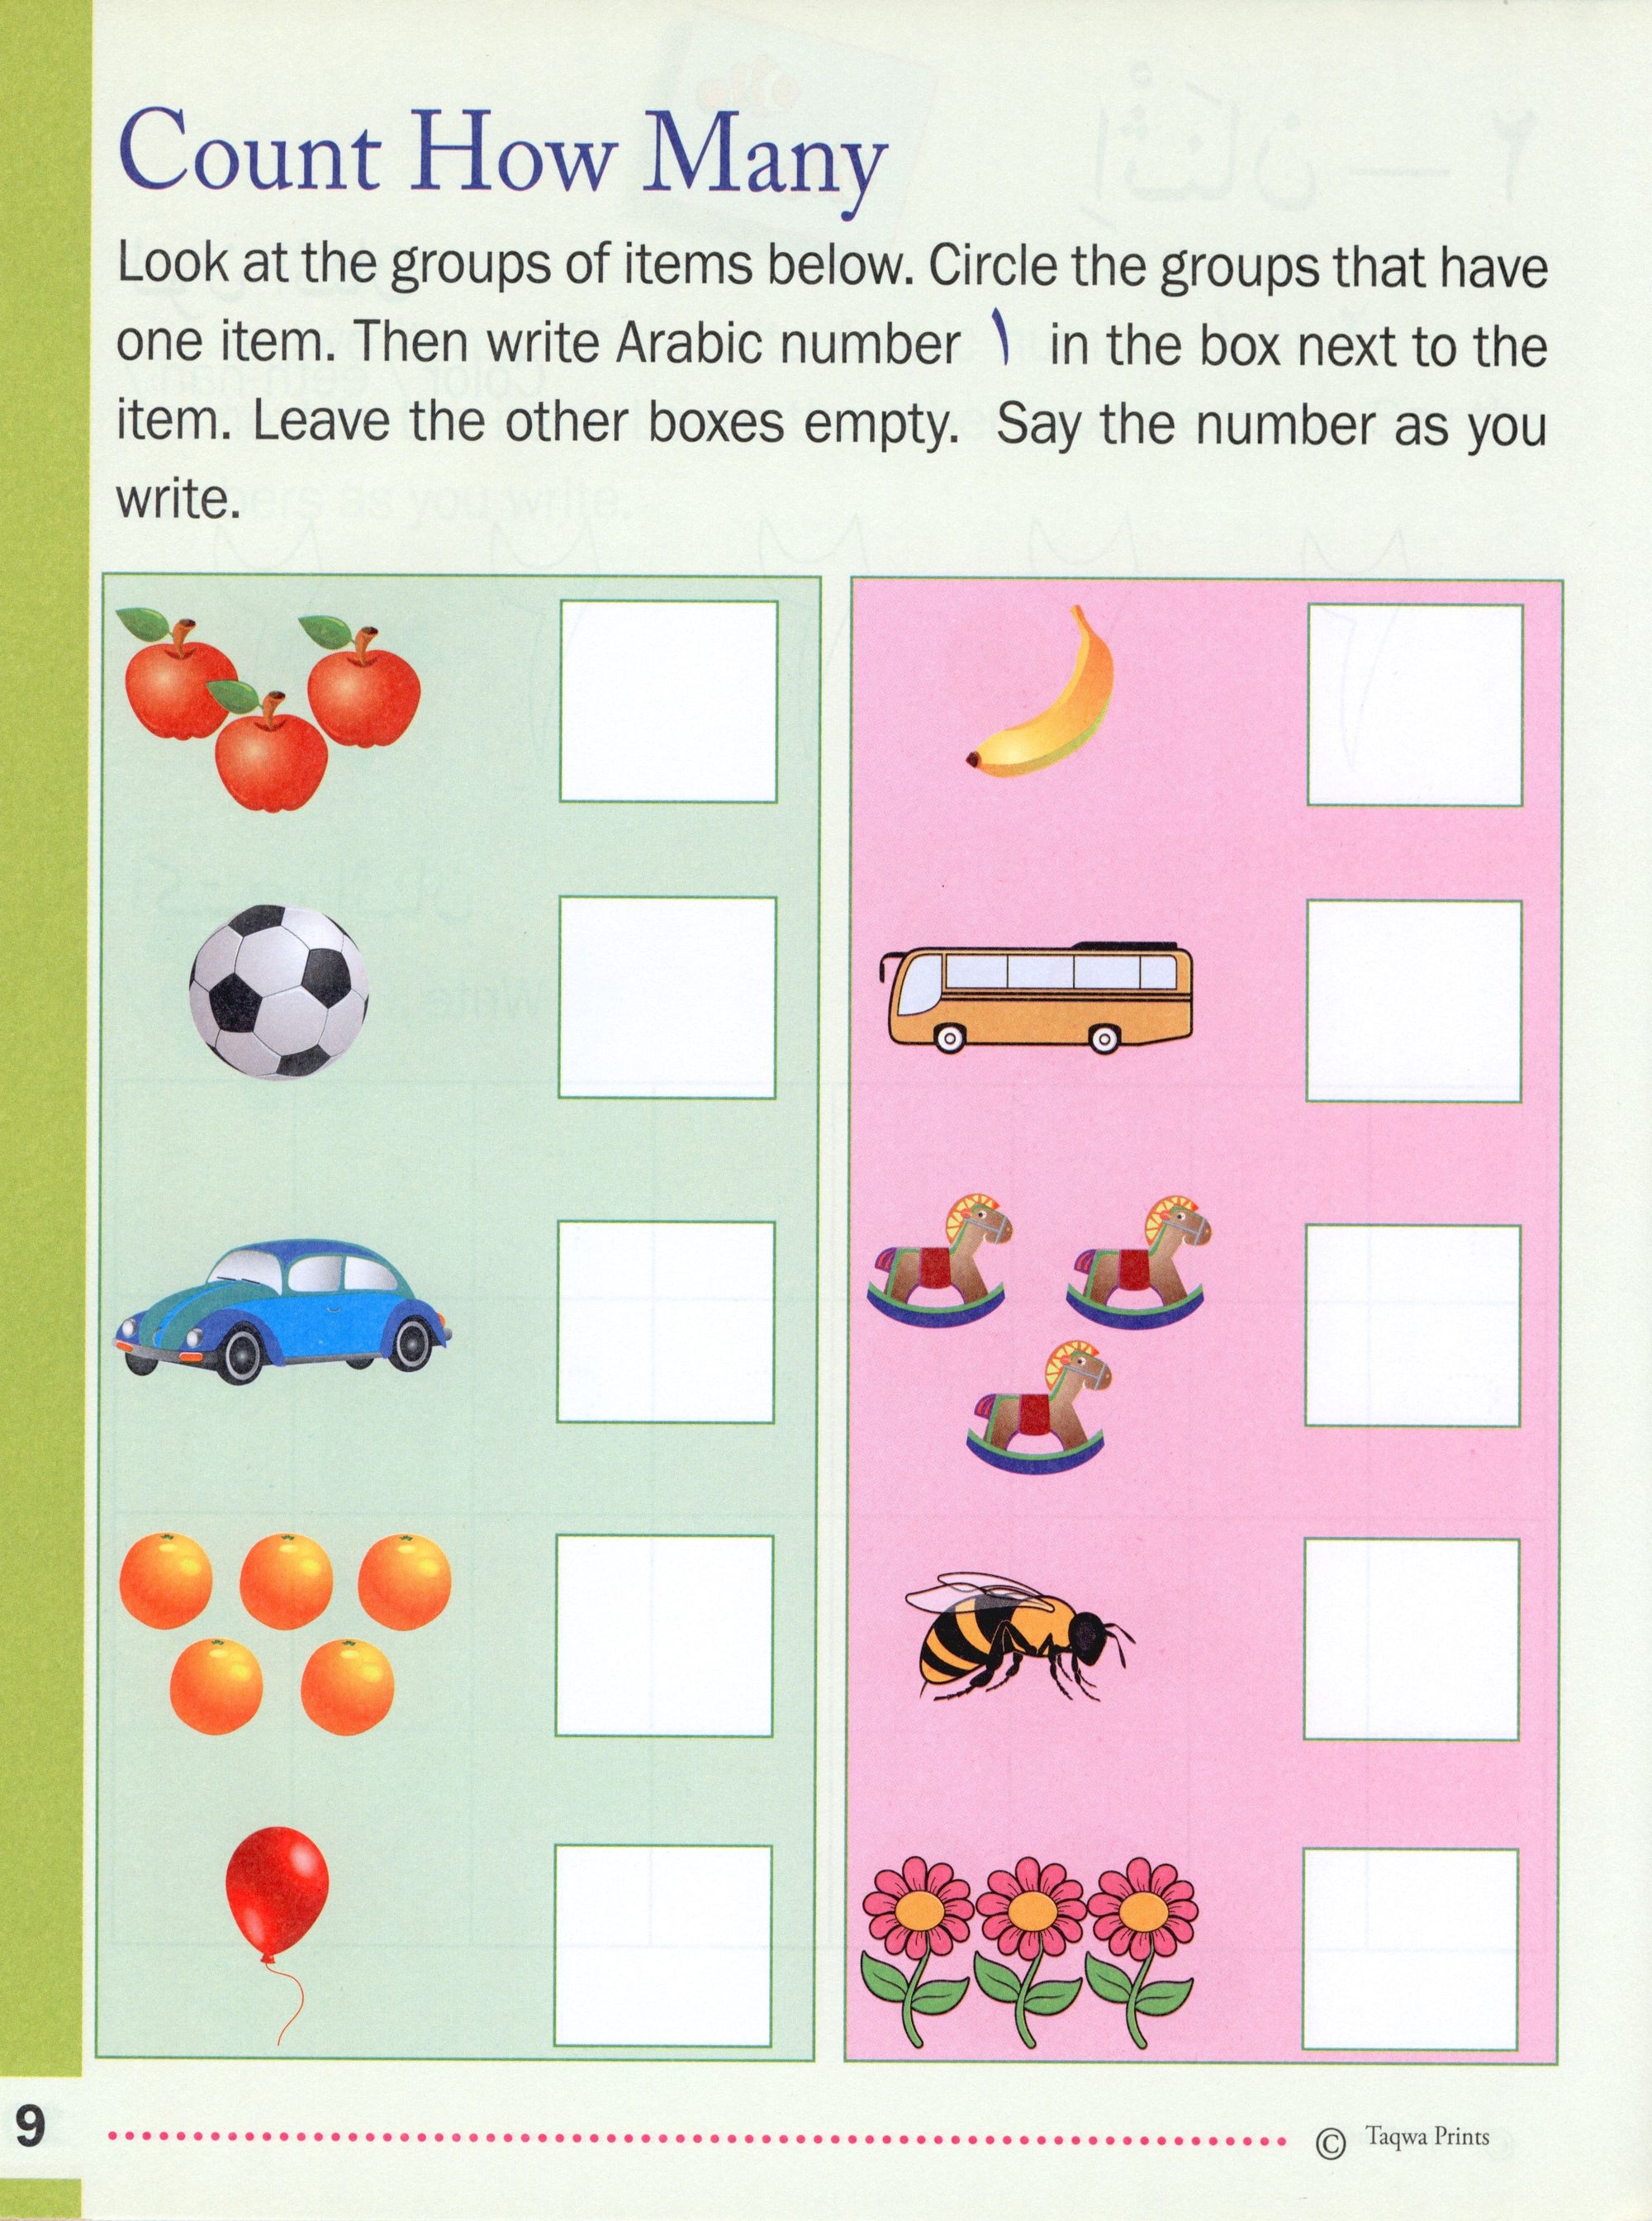 Learning Numbers and Counting in Arabic